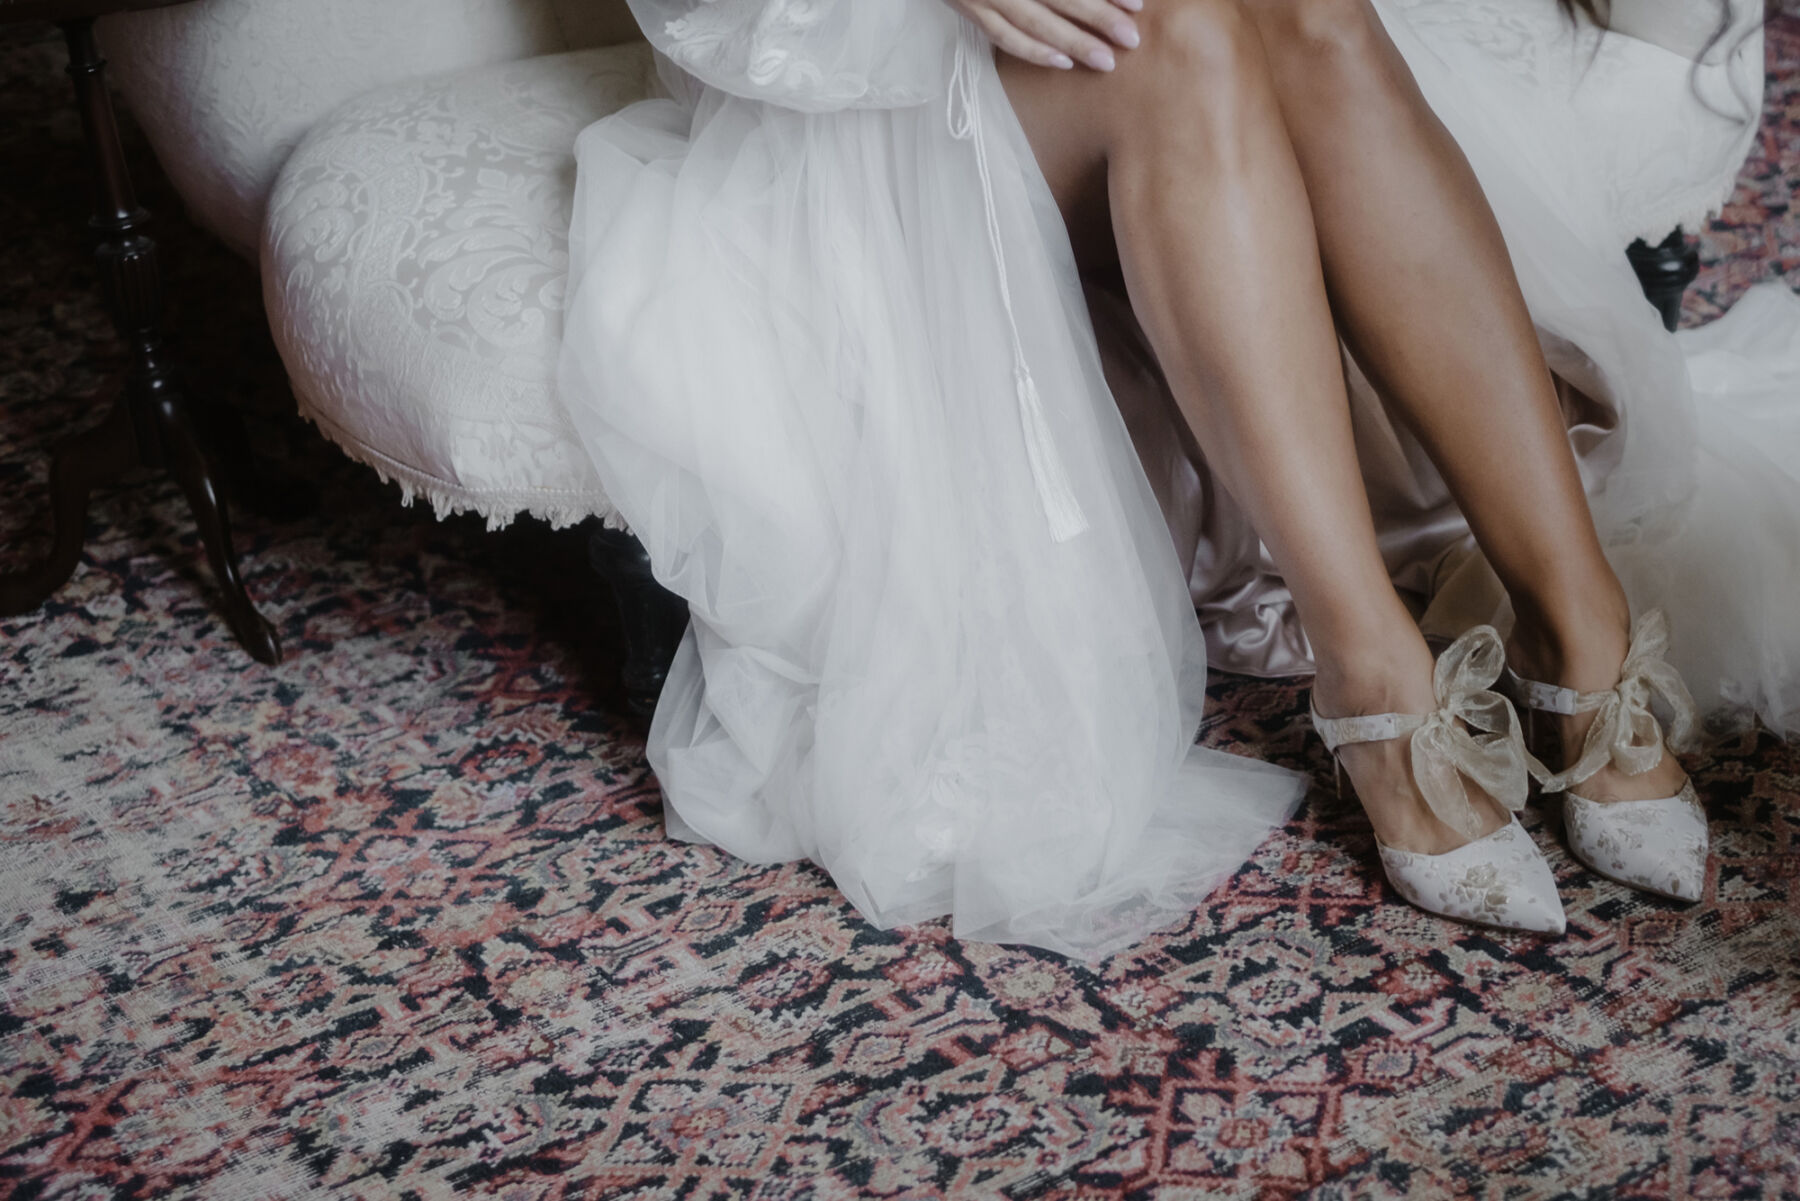 Elvie Pointed Toe Pump wedding shoes with tulle ribbon ties, by Something Blue.